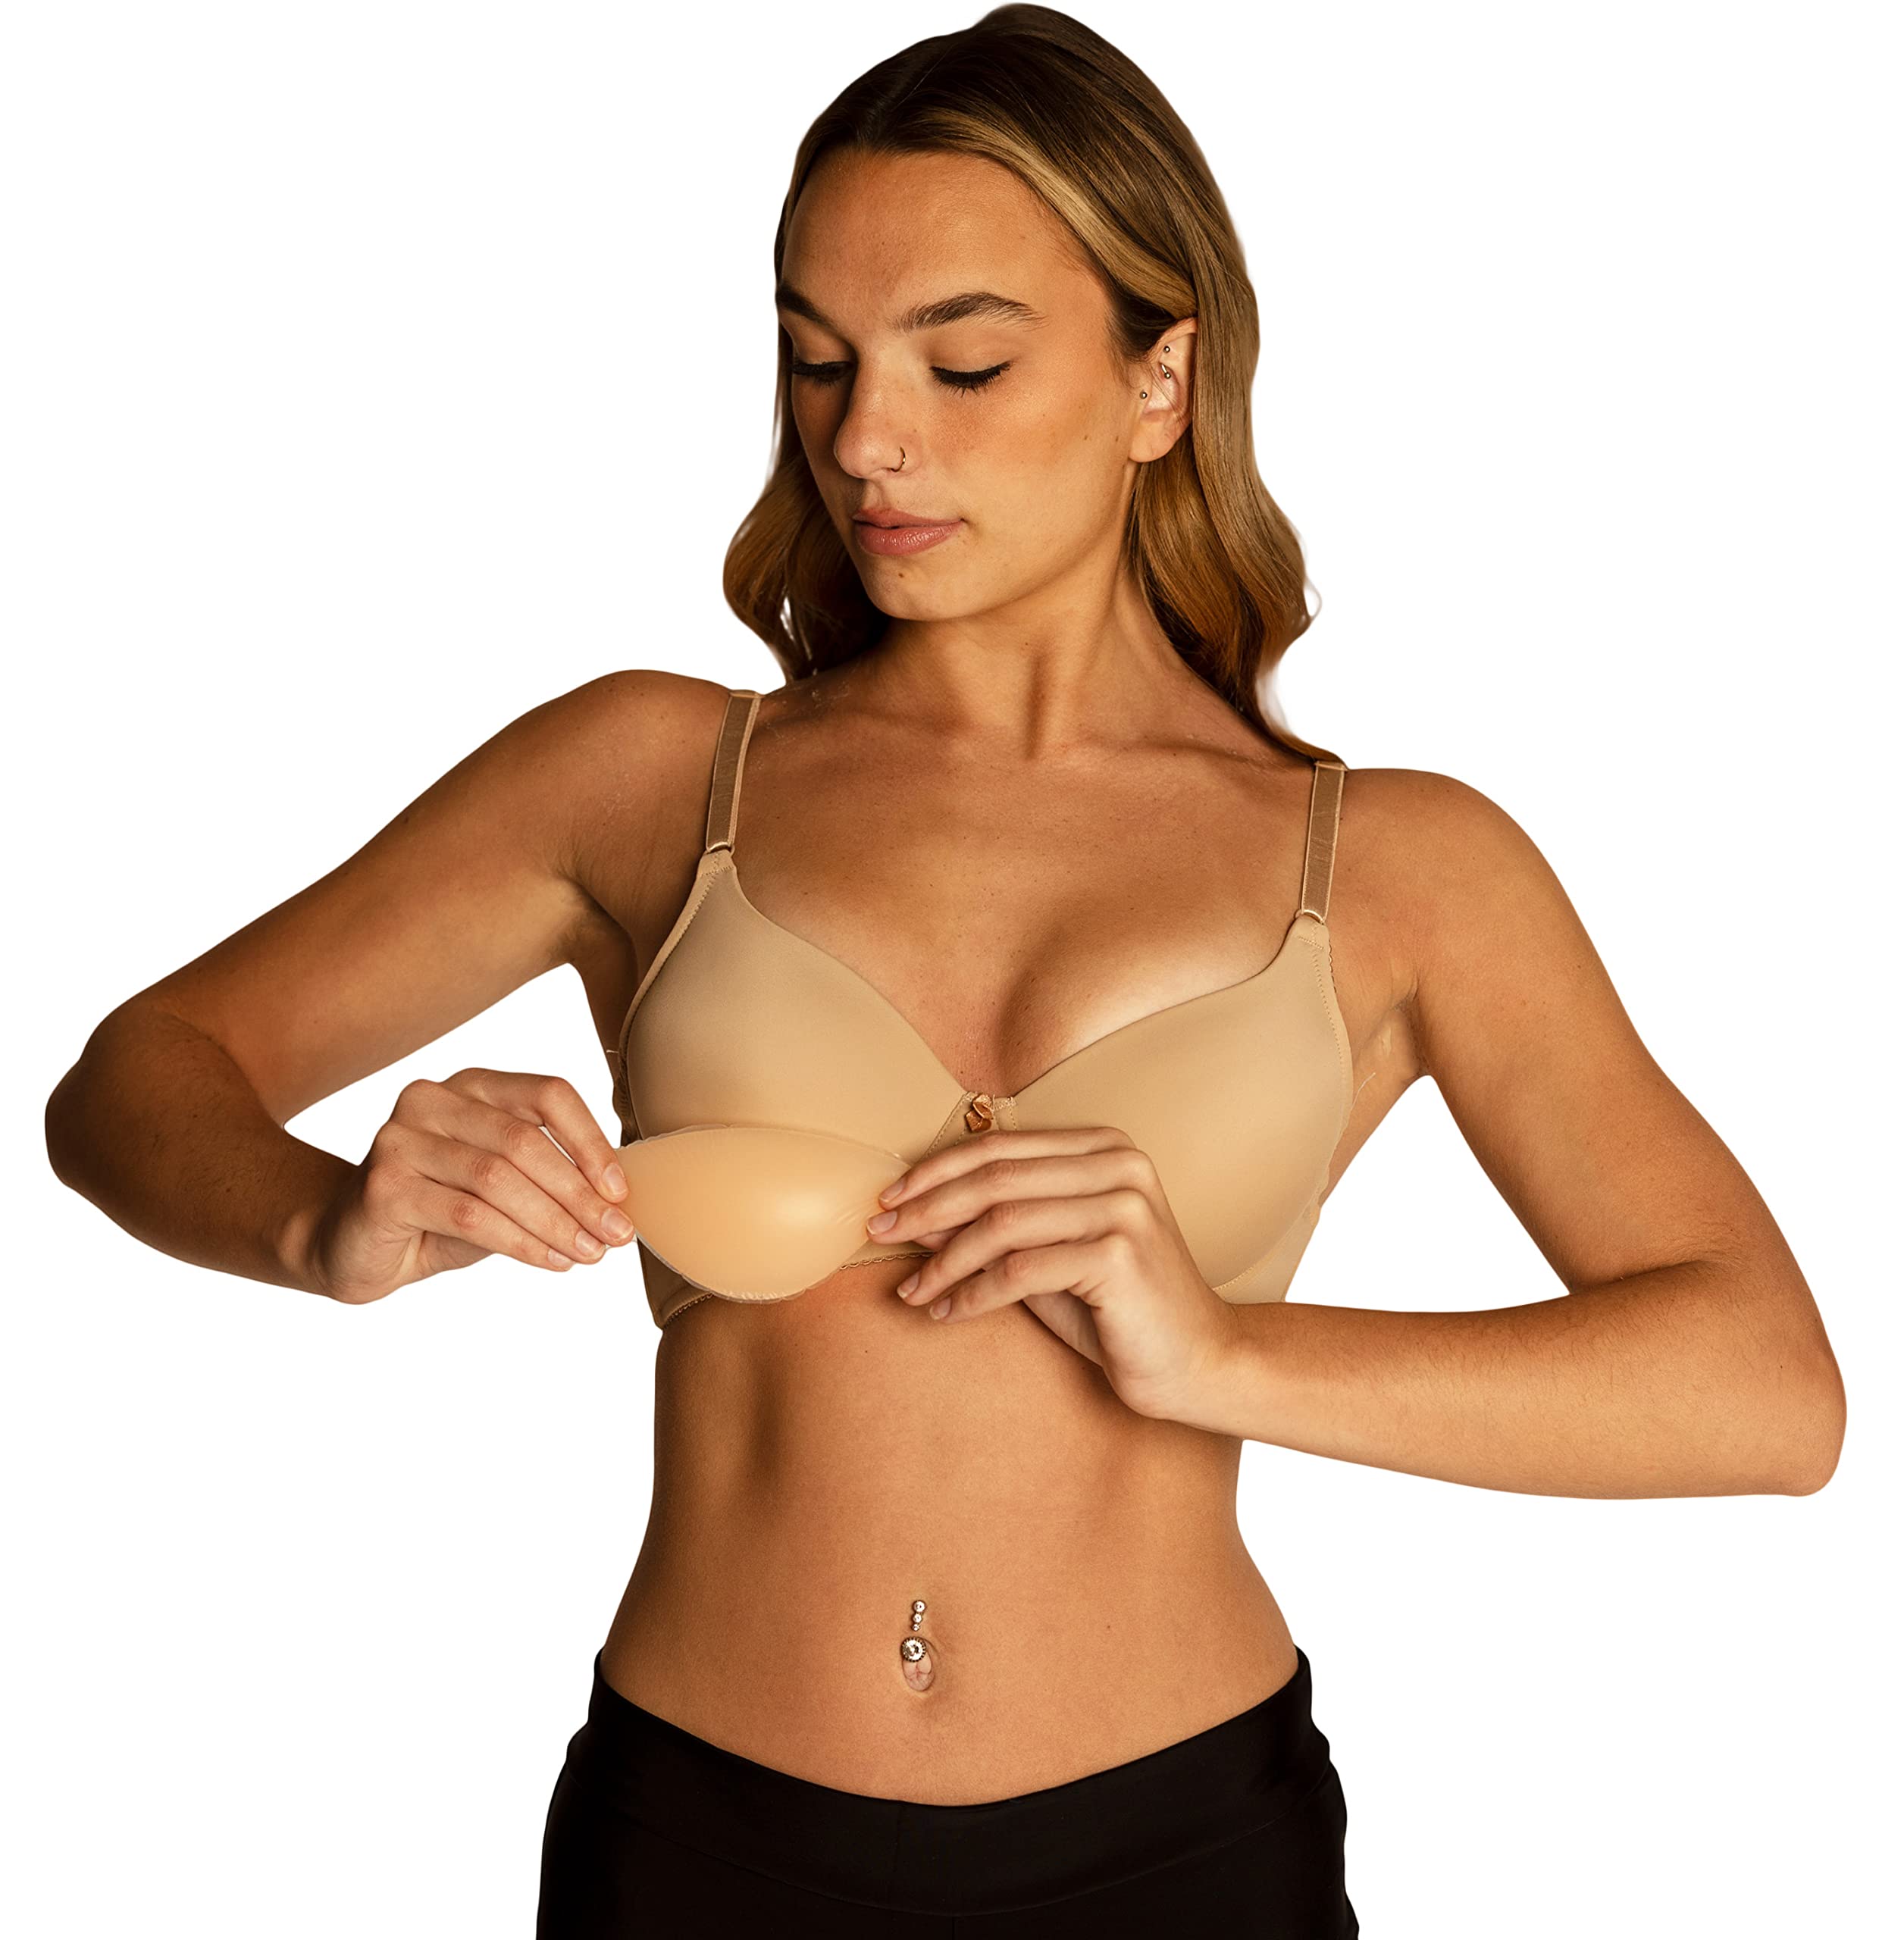  Bra Pads & Breast Enhancers - Bra Pads & Breast Enhancers /  Women's Lingerie Acc: Clothing, Shoes & Jewelry